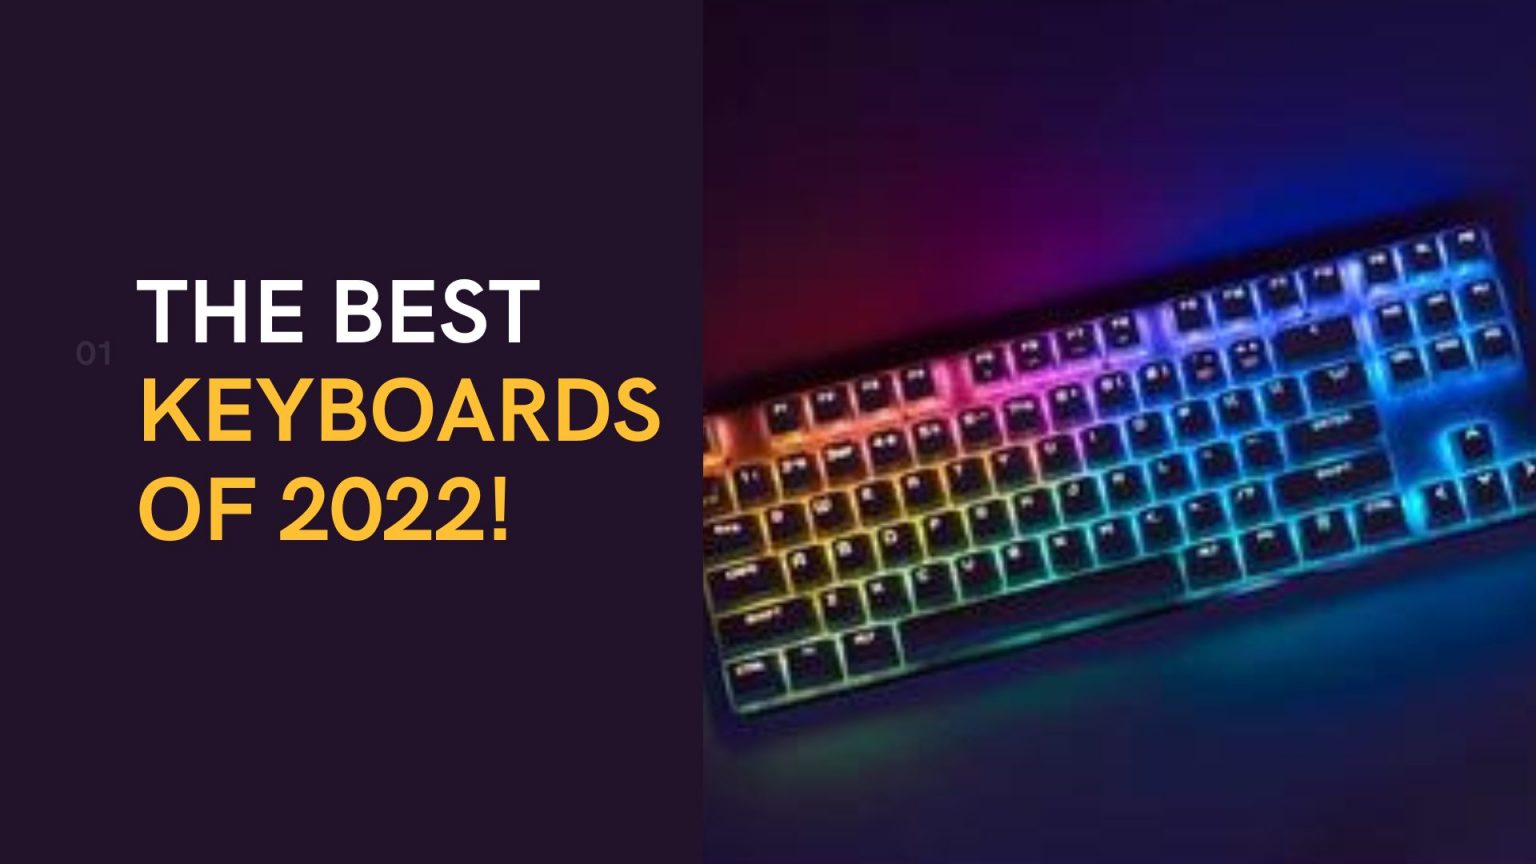 The best keyboards of 2022